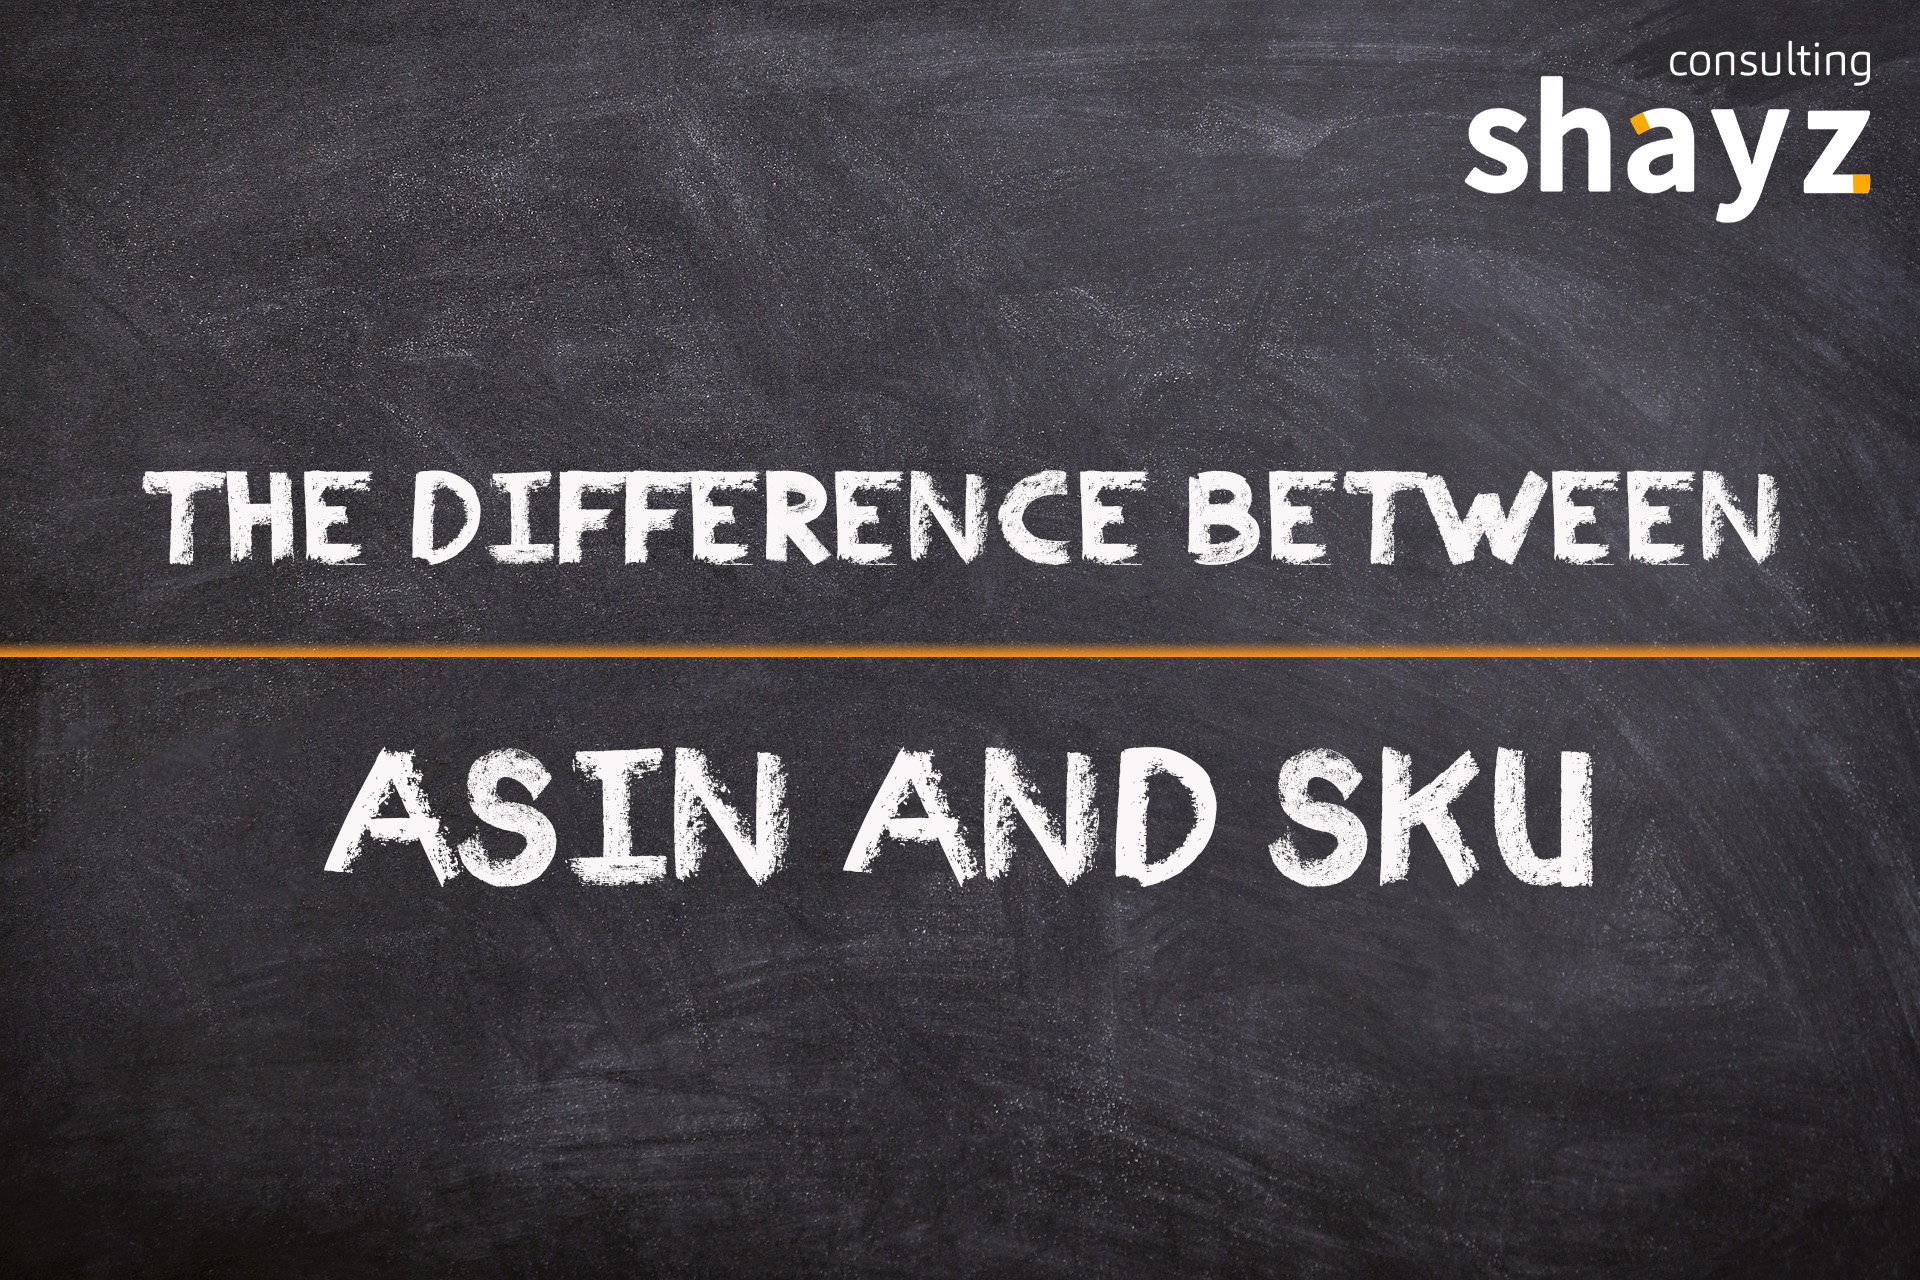 The Difference between ASIN and SKU